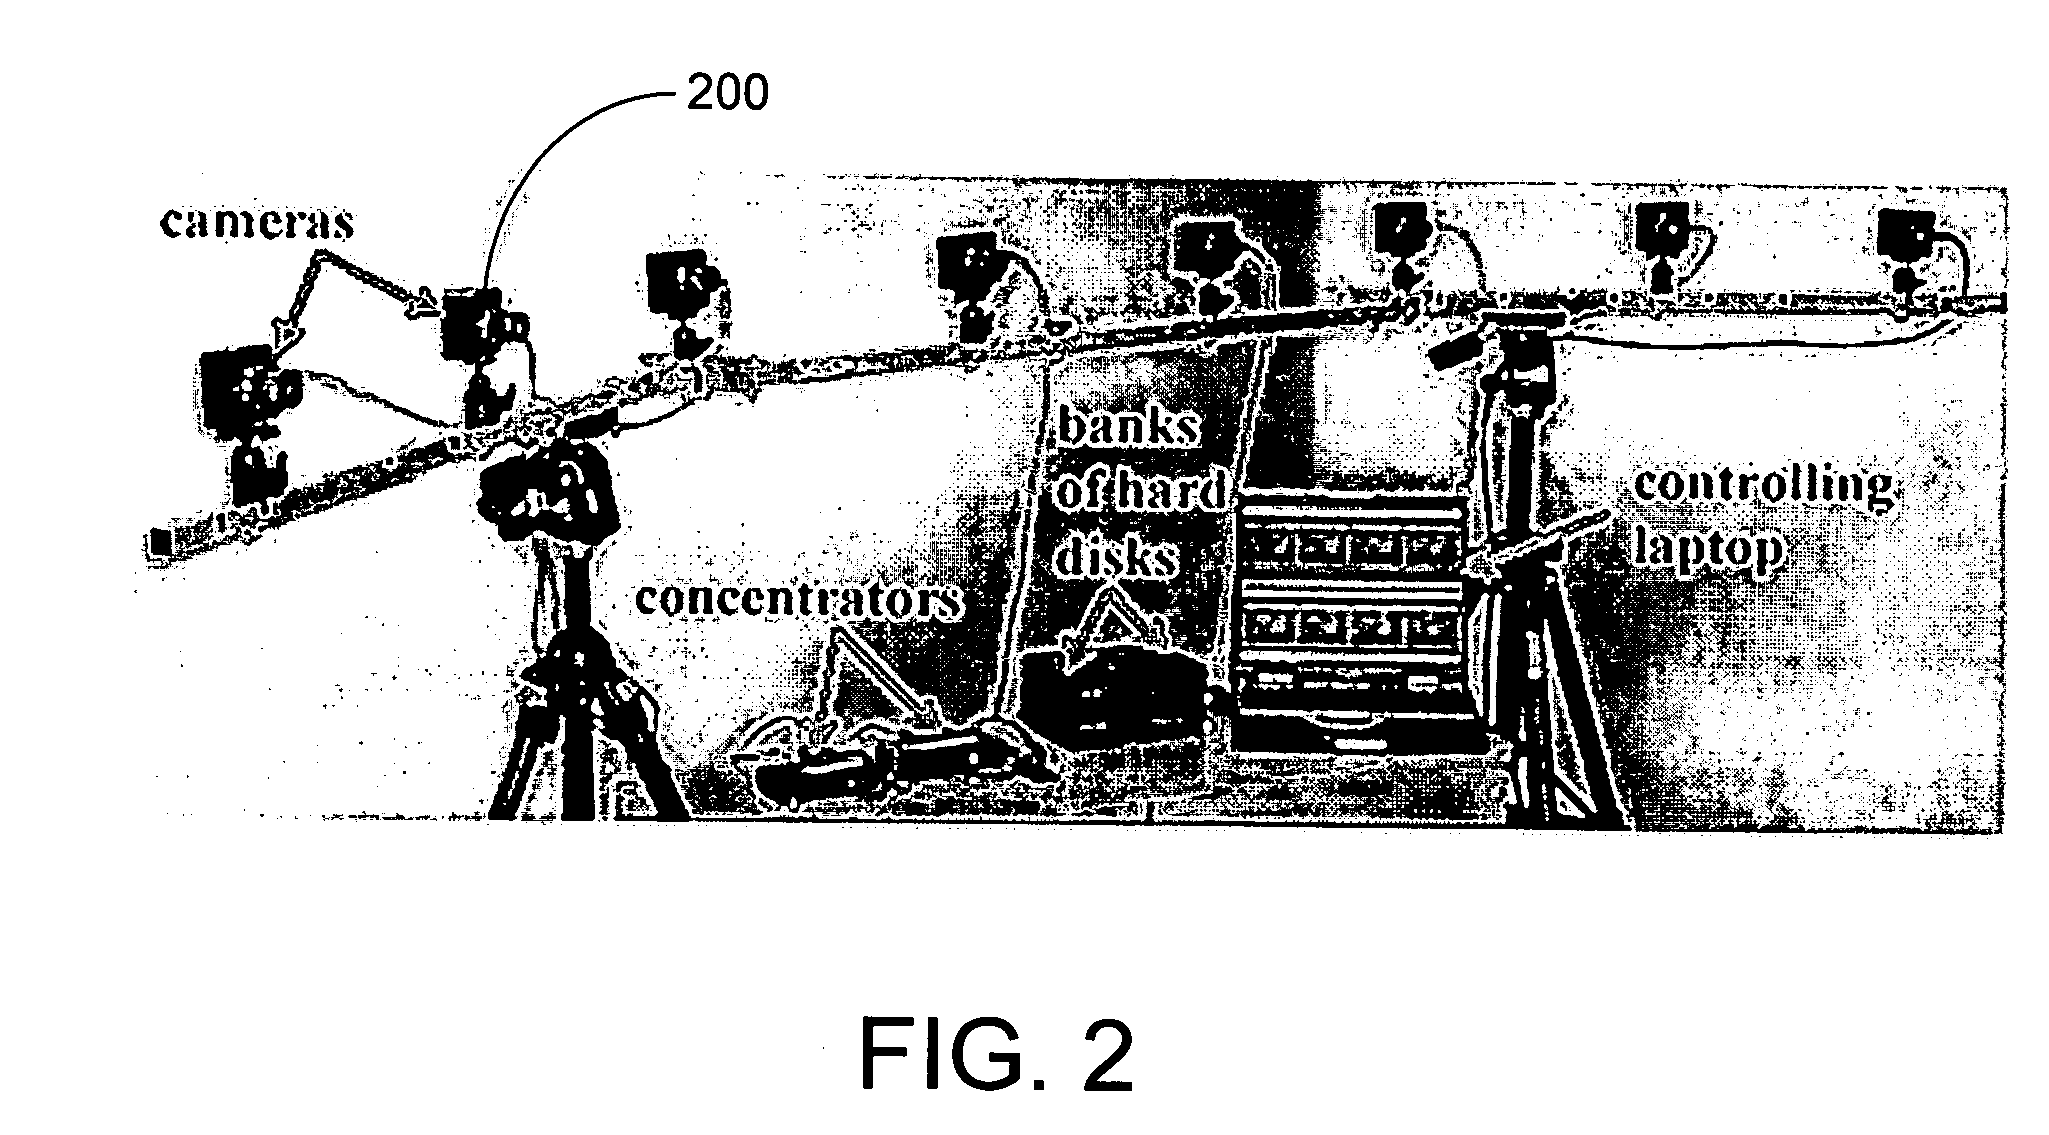 System and process for compressing and decompressing multiple, layered, video streams employing spatial and temporal encoding